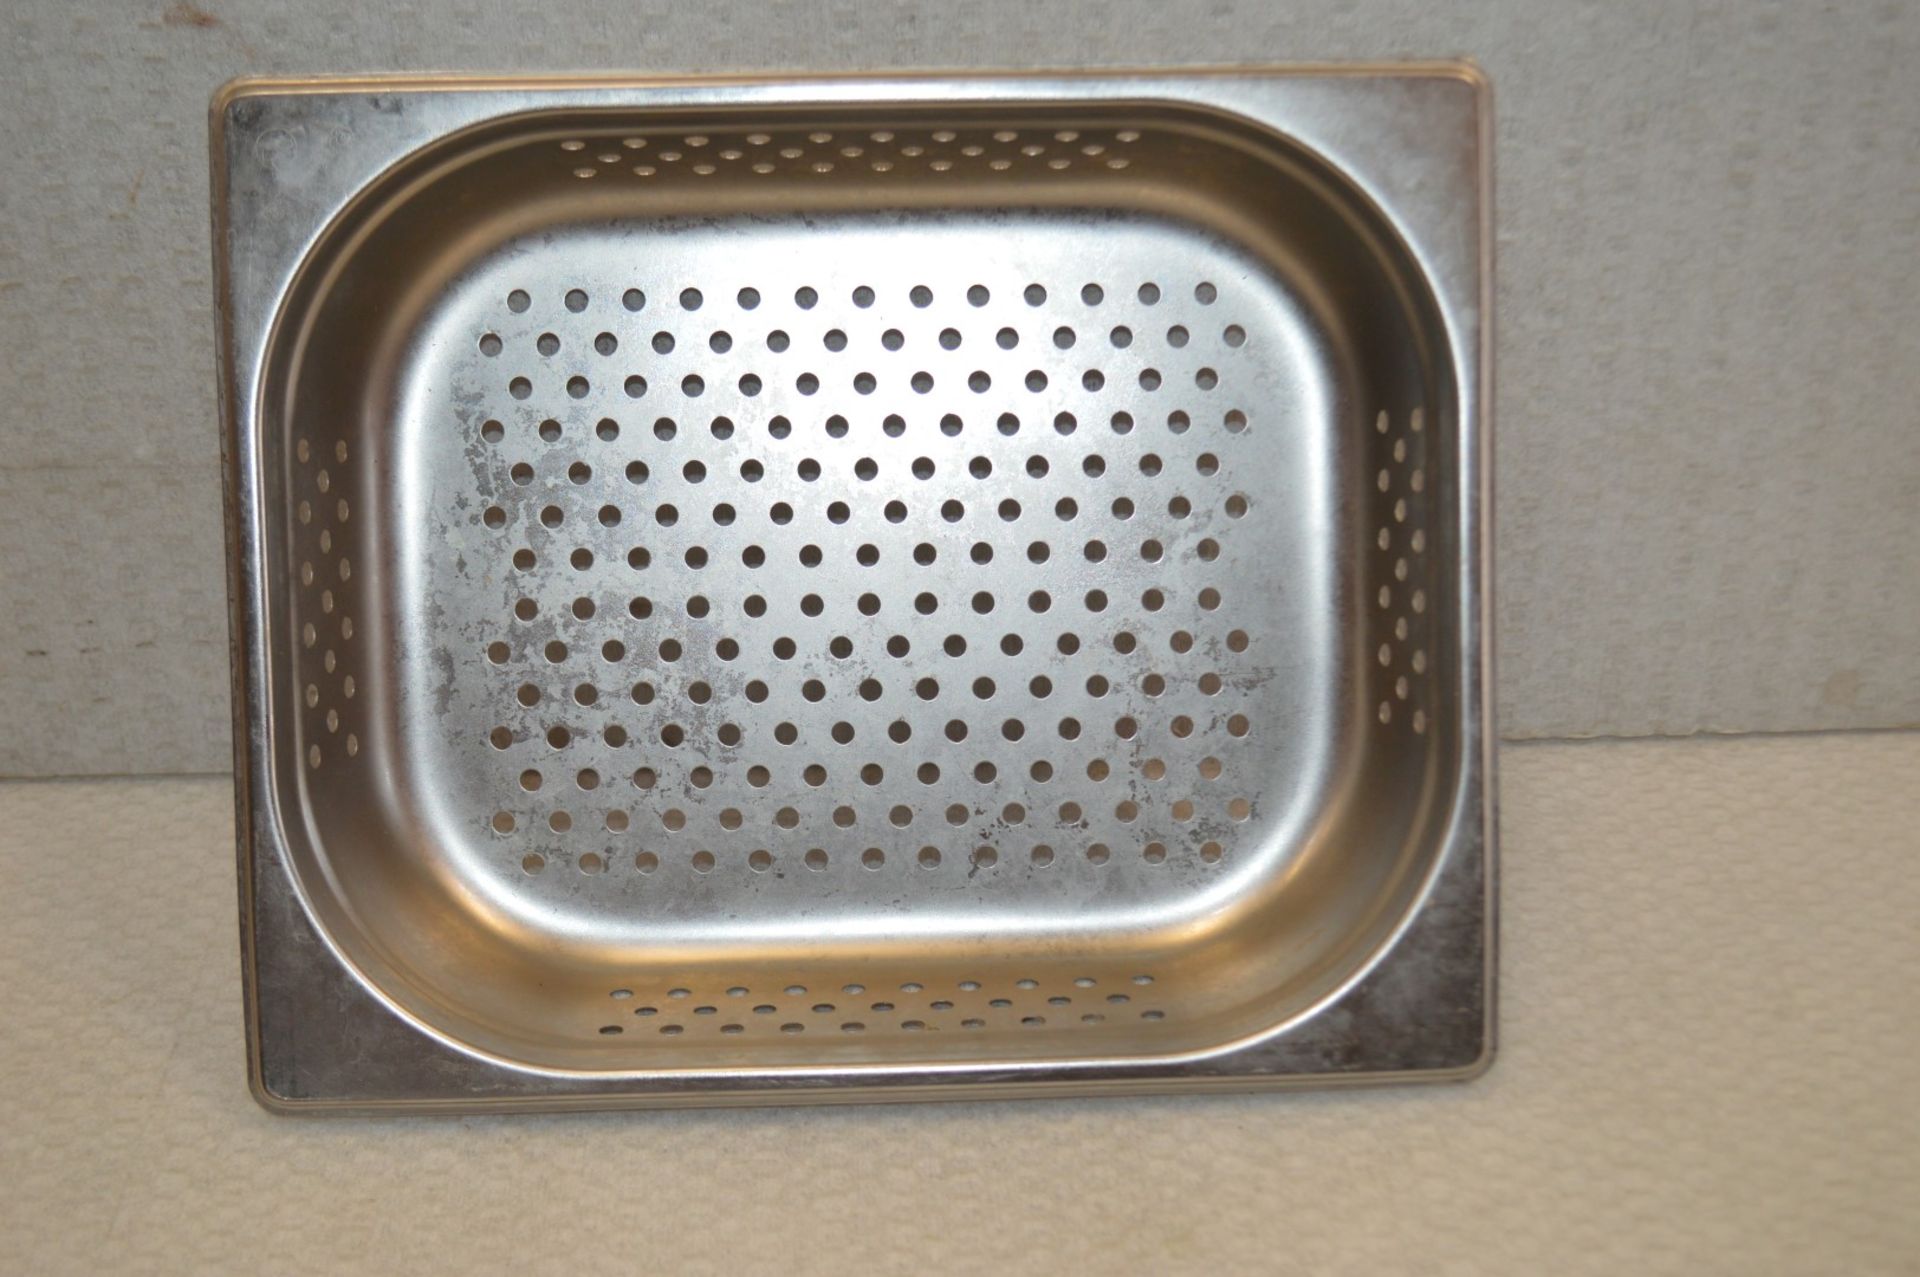 10 x Stainless Steel Gastronorm Trays - Dimensions: L33 x W26.5 cm - Includes Perforated and None - Image 3 of 3